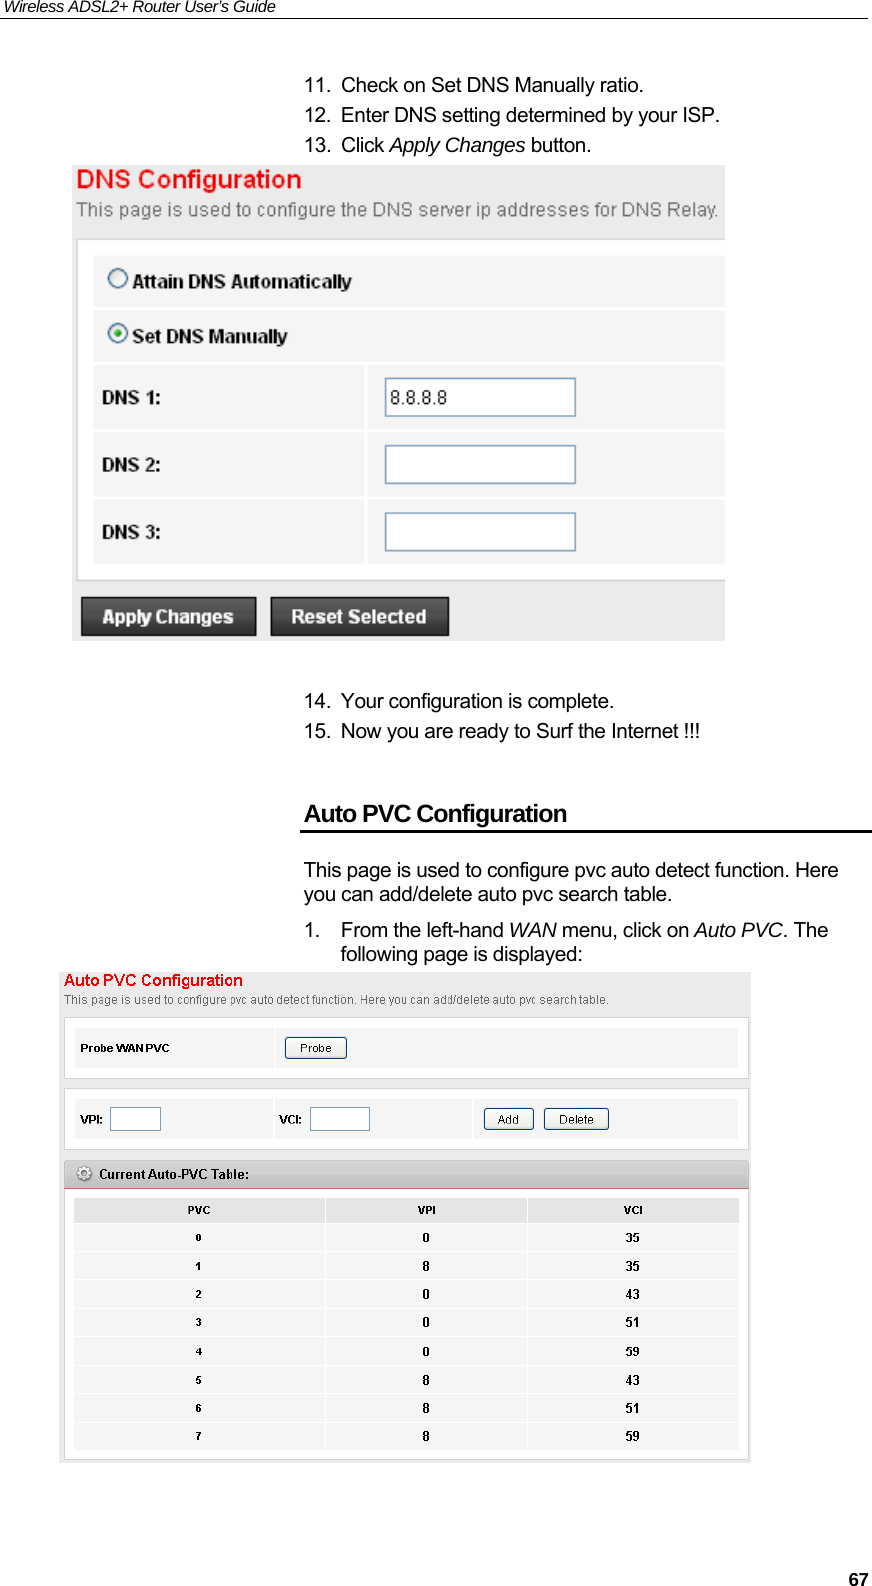 Wireless ADSL2+ Router User’s Guide     6711.  Check on Set DNS Manually ratio. 12.  Enter DNS setting determined by your ISP. 13. Click Apply Changes button.   14.  Your configuration is complete. 15.  Now you are ready to Surf the Internet !!!  Auto PVC Configuration This page is used to configure pvc auto detect function. Here you can add/delete auto pvc search table. 1.  From the left-hand WAN menu, click on Auto PVC. The following page is displayed:   